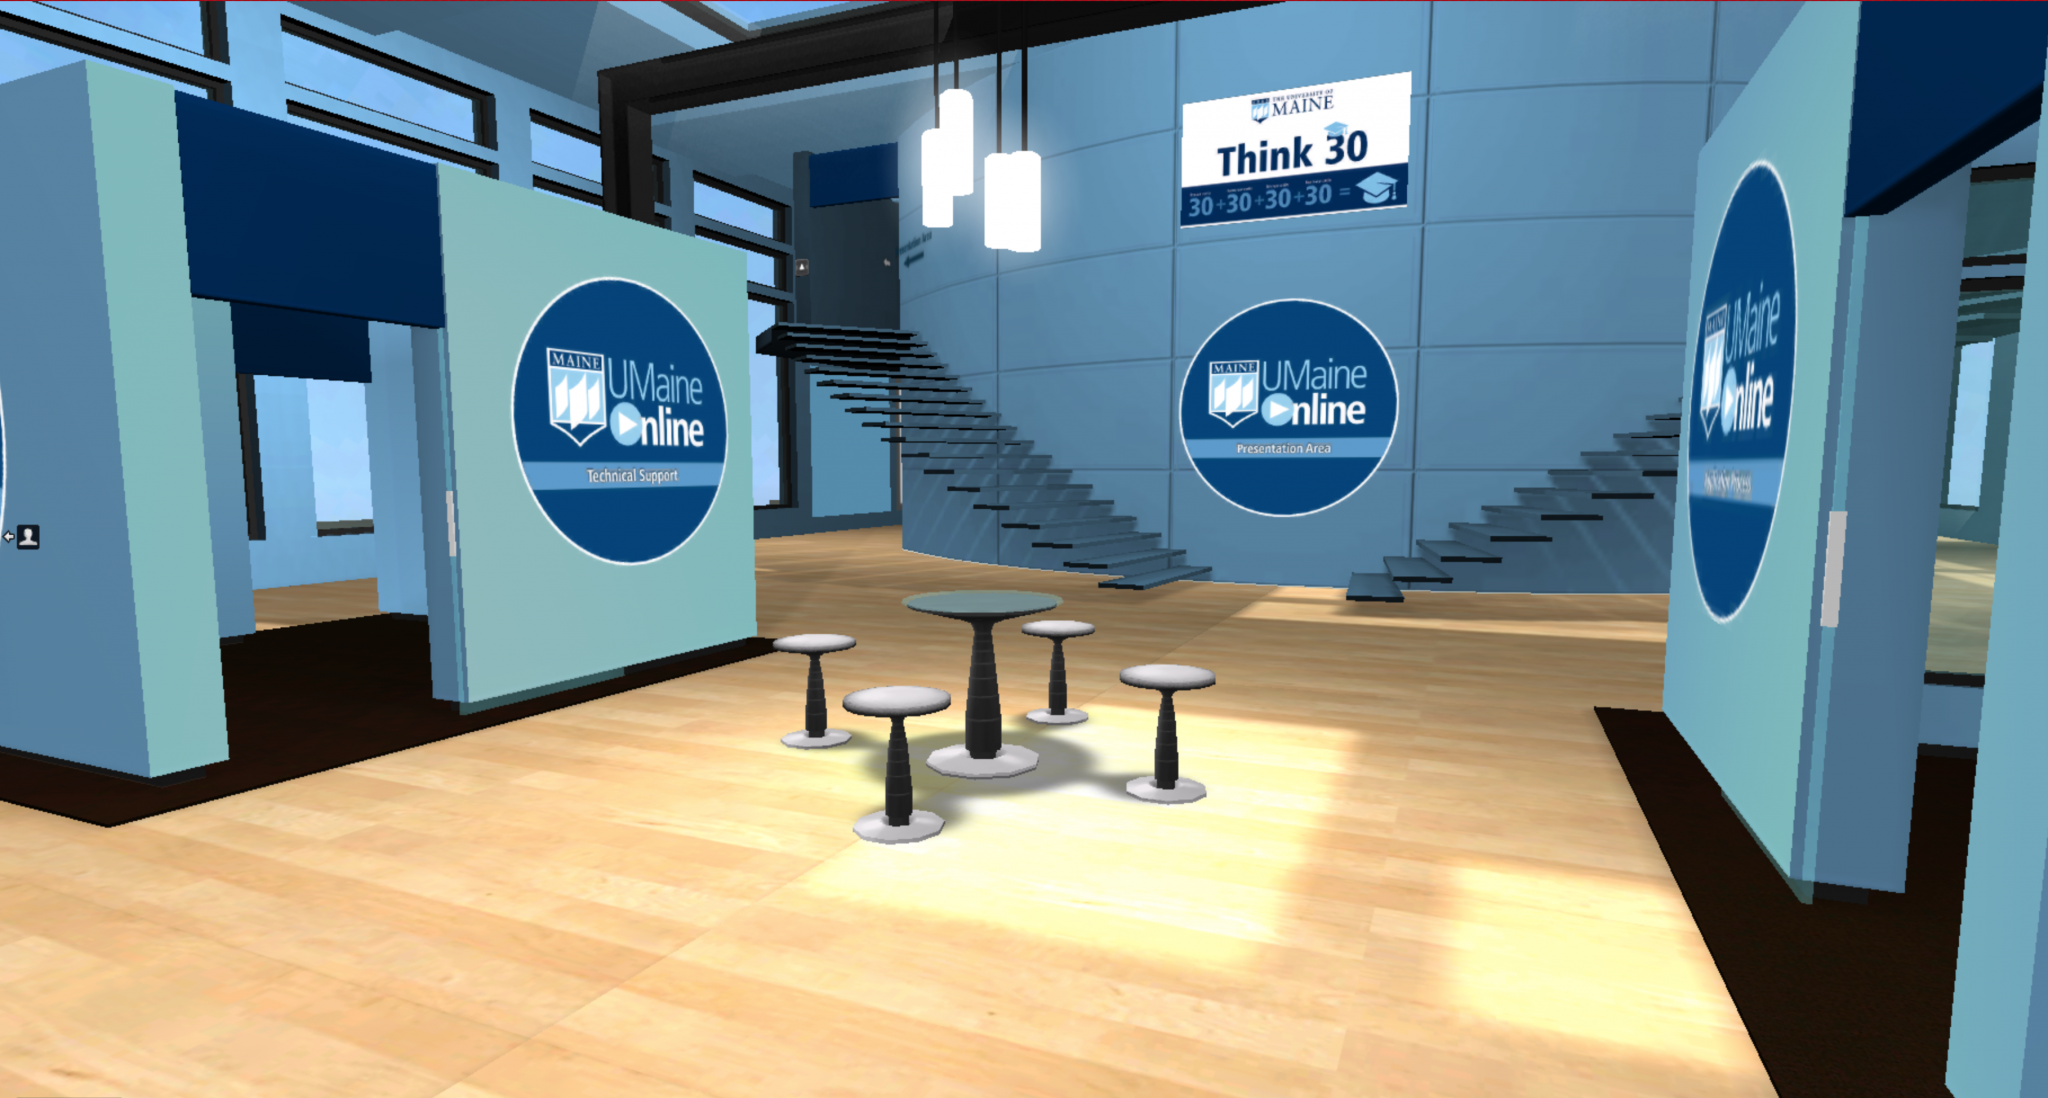 Screenshot of the virtual info session with Think 30 and UMaine Online logos